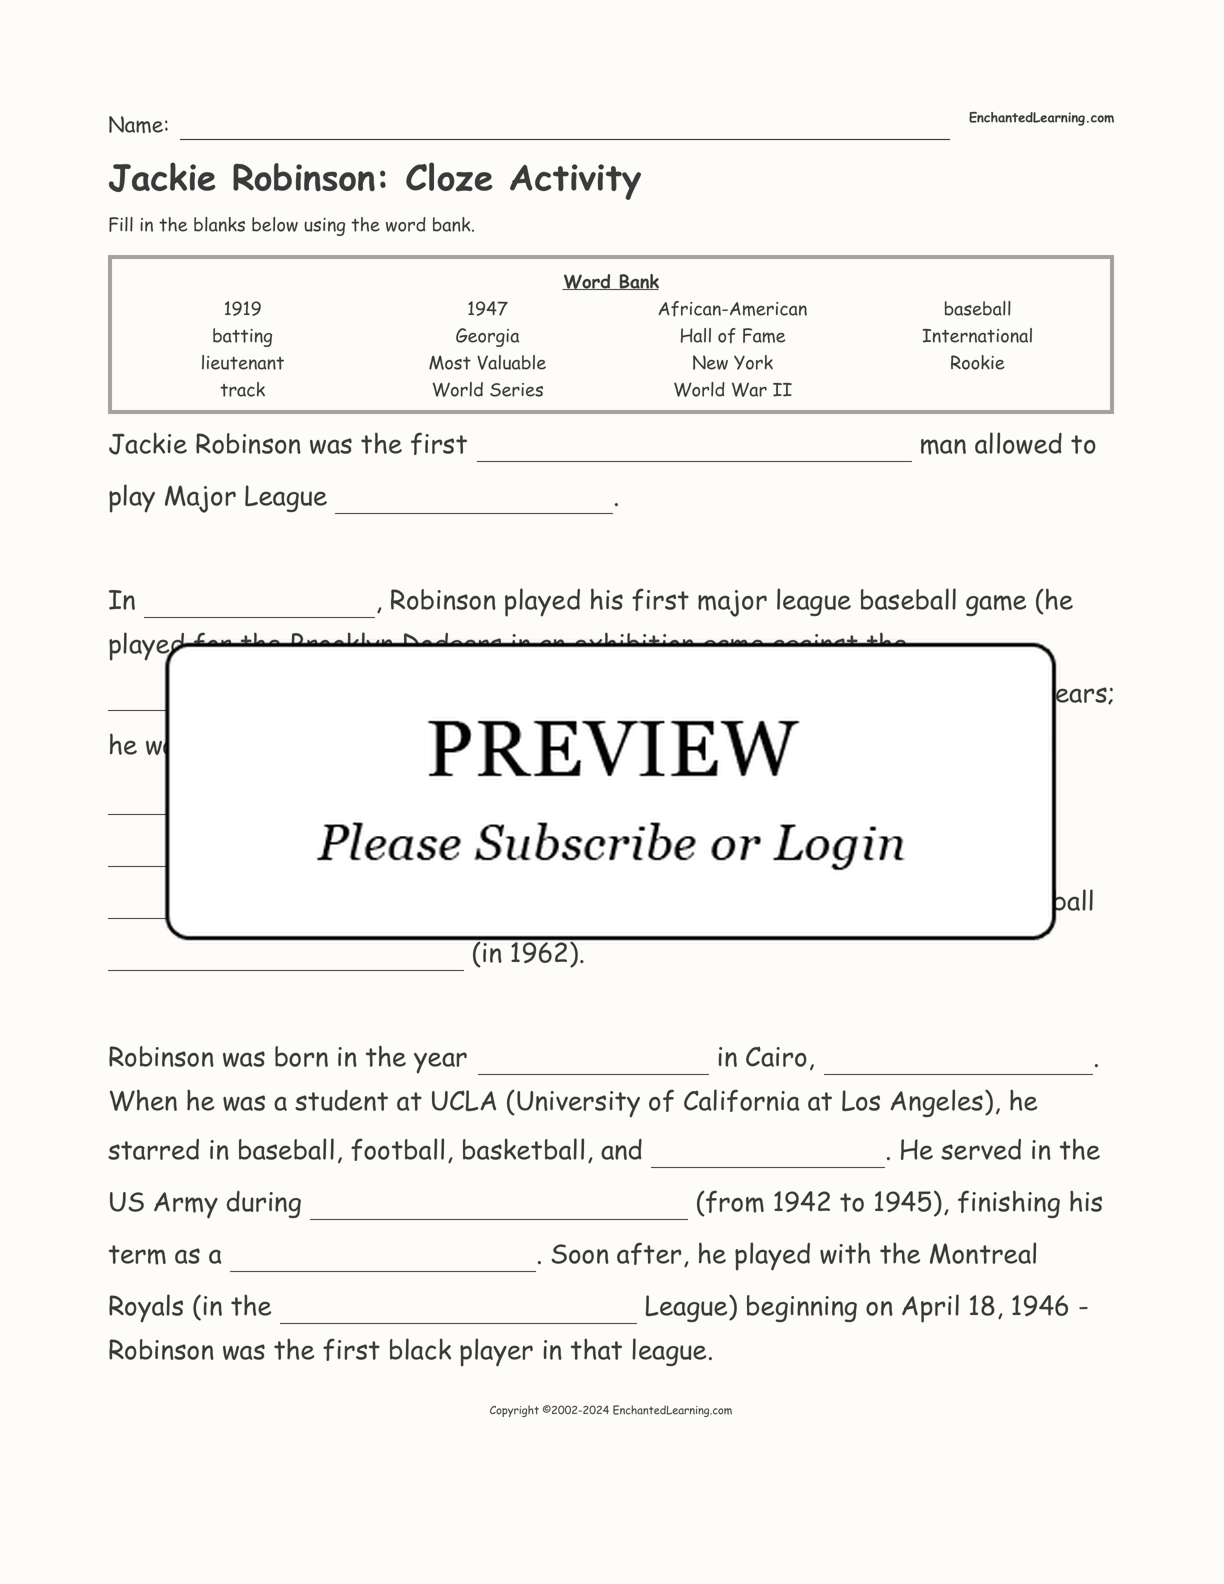 Jackie Robinson: Cloze Activity interactive worksheet page 1